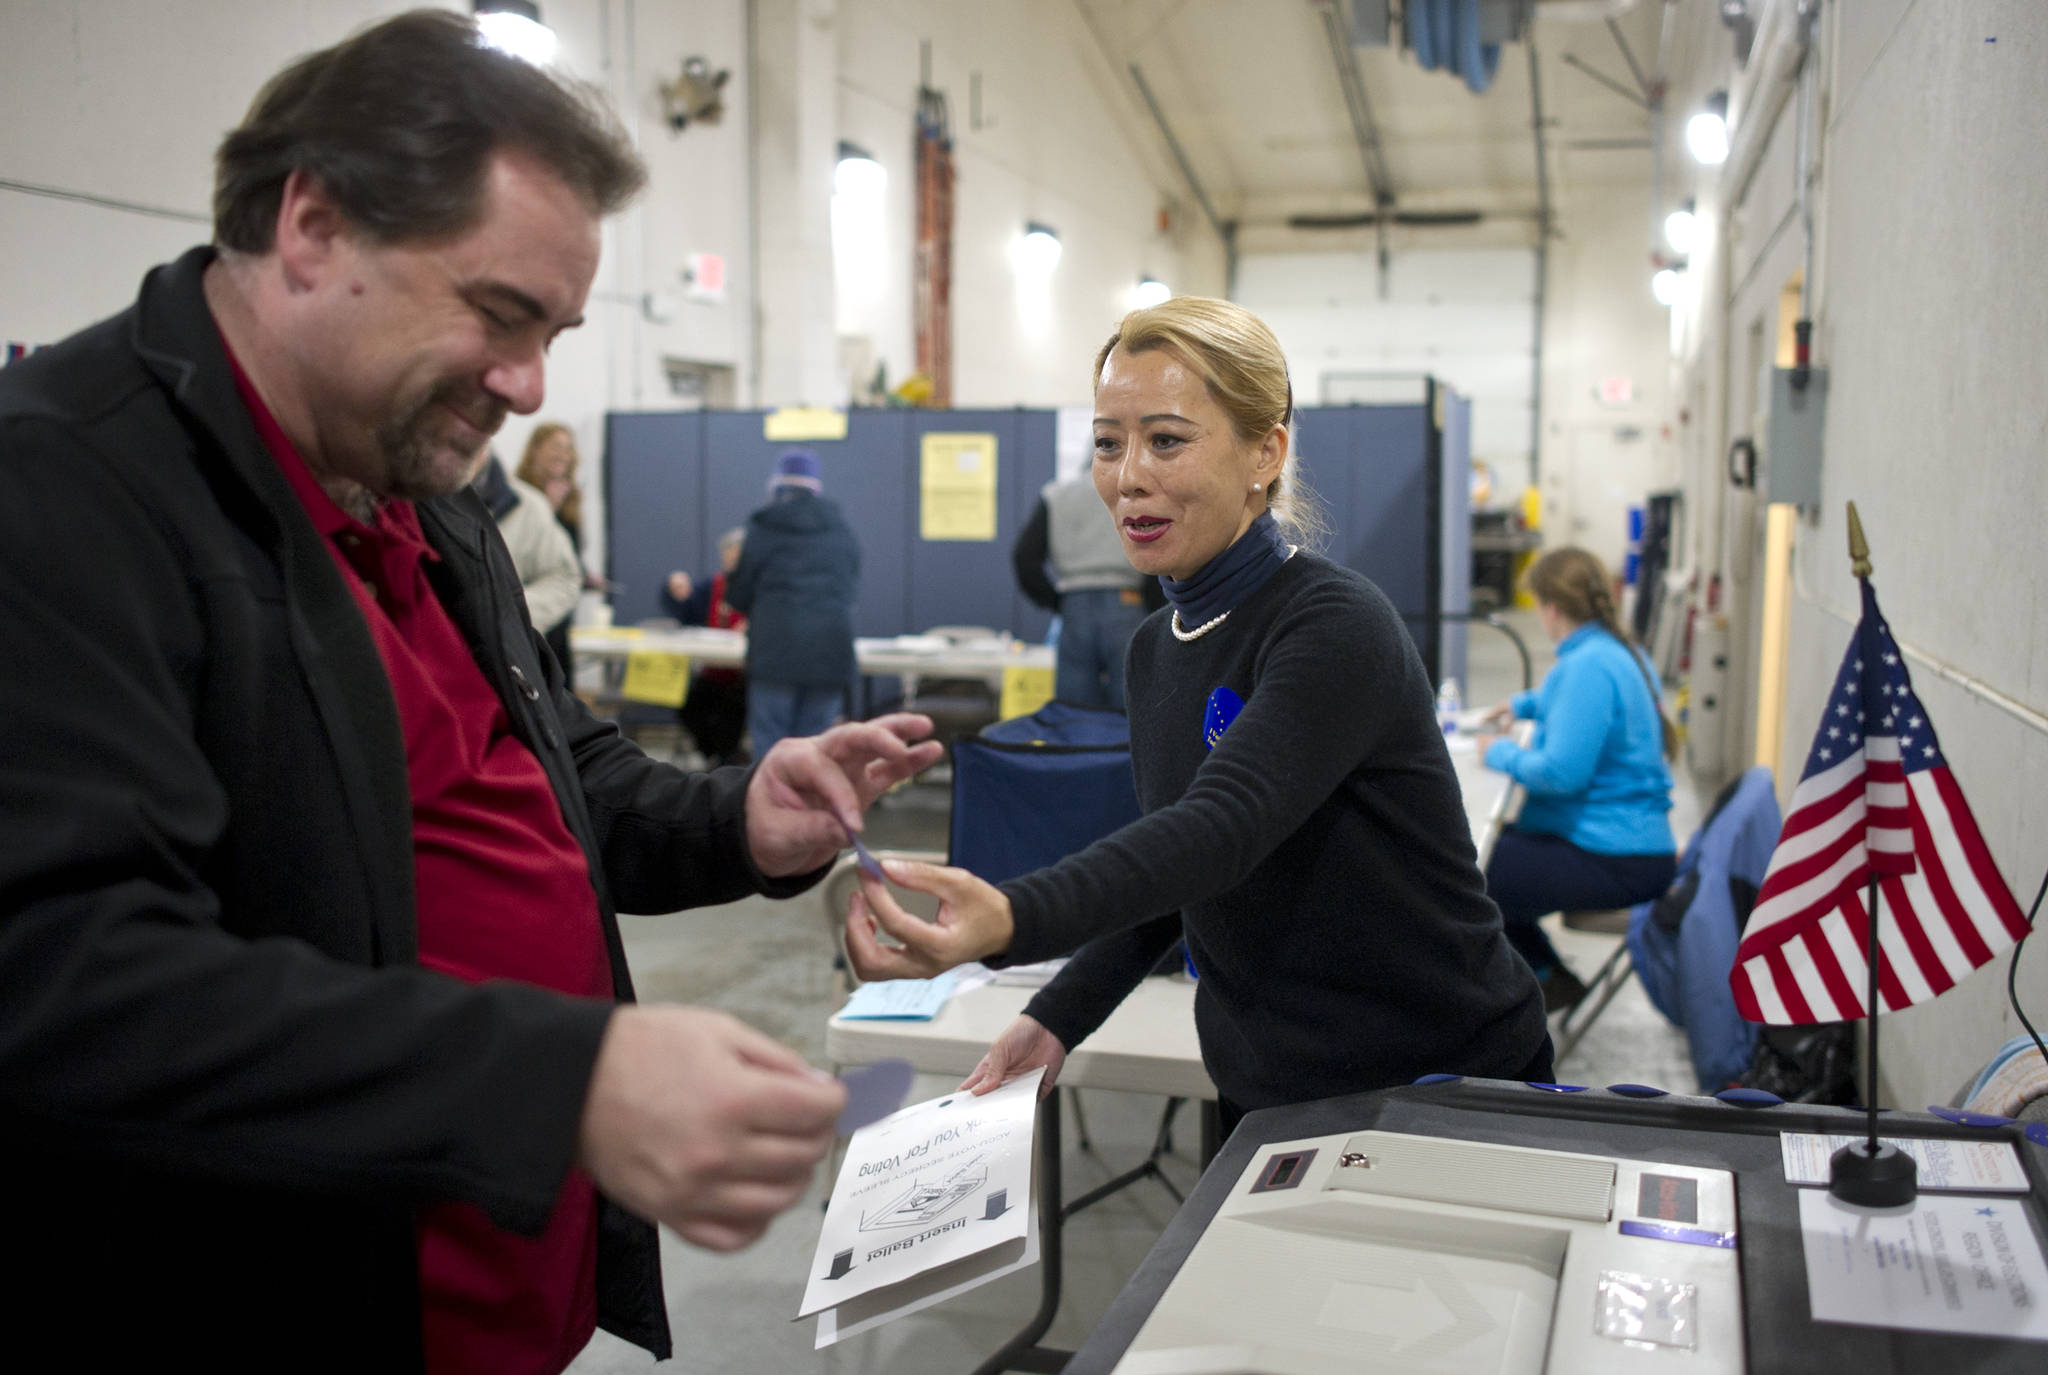 In this Nov. 8, 2016 photo, election volunteer Lily Hong Campbell hands William Grooms a voter sticker after he cast his ballot at AEL&P. (Michael Penn | Juneau Empire File)